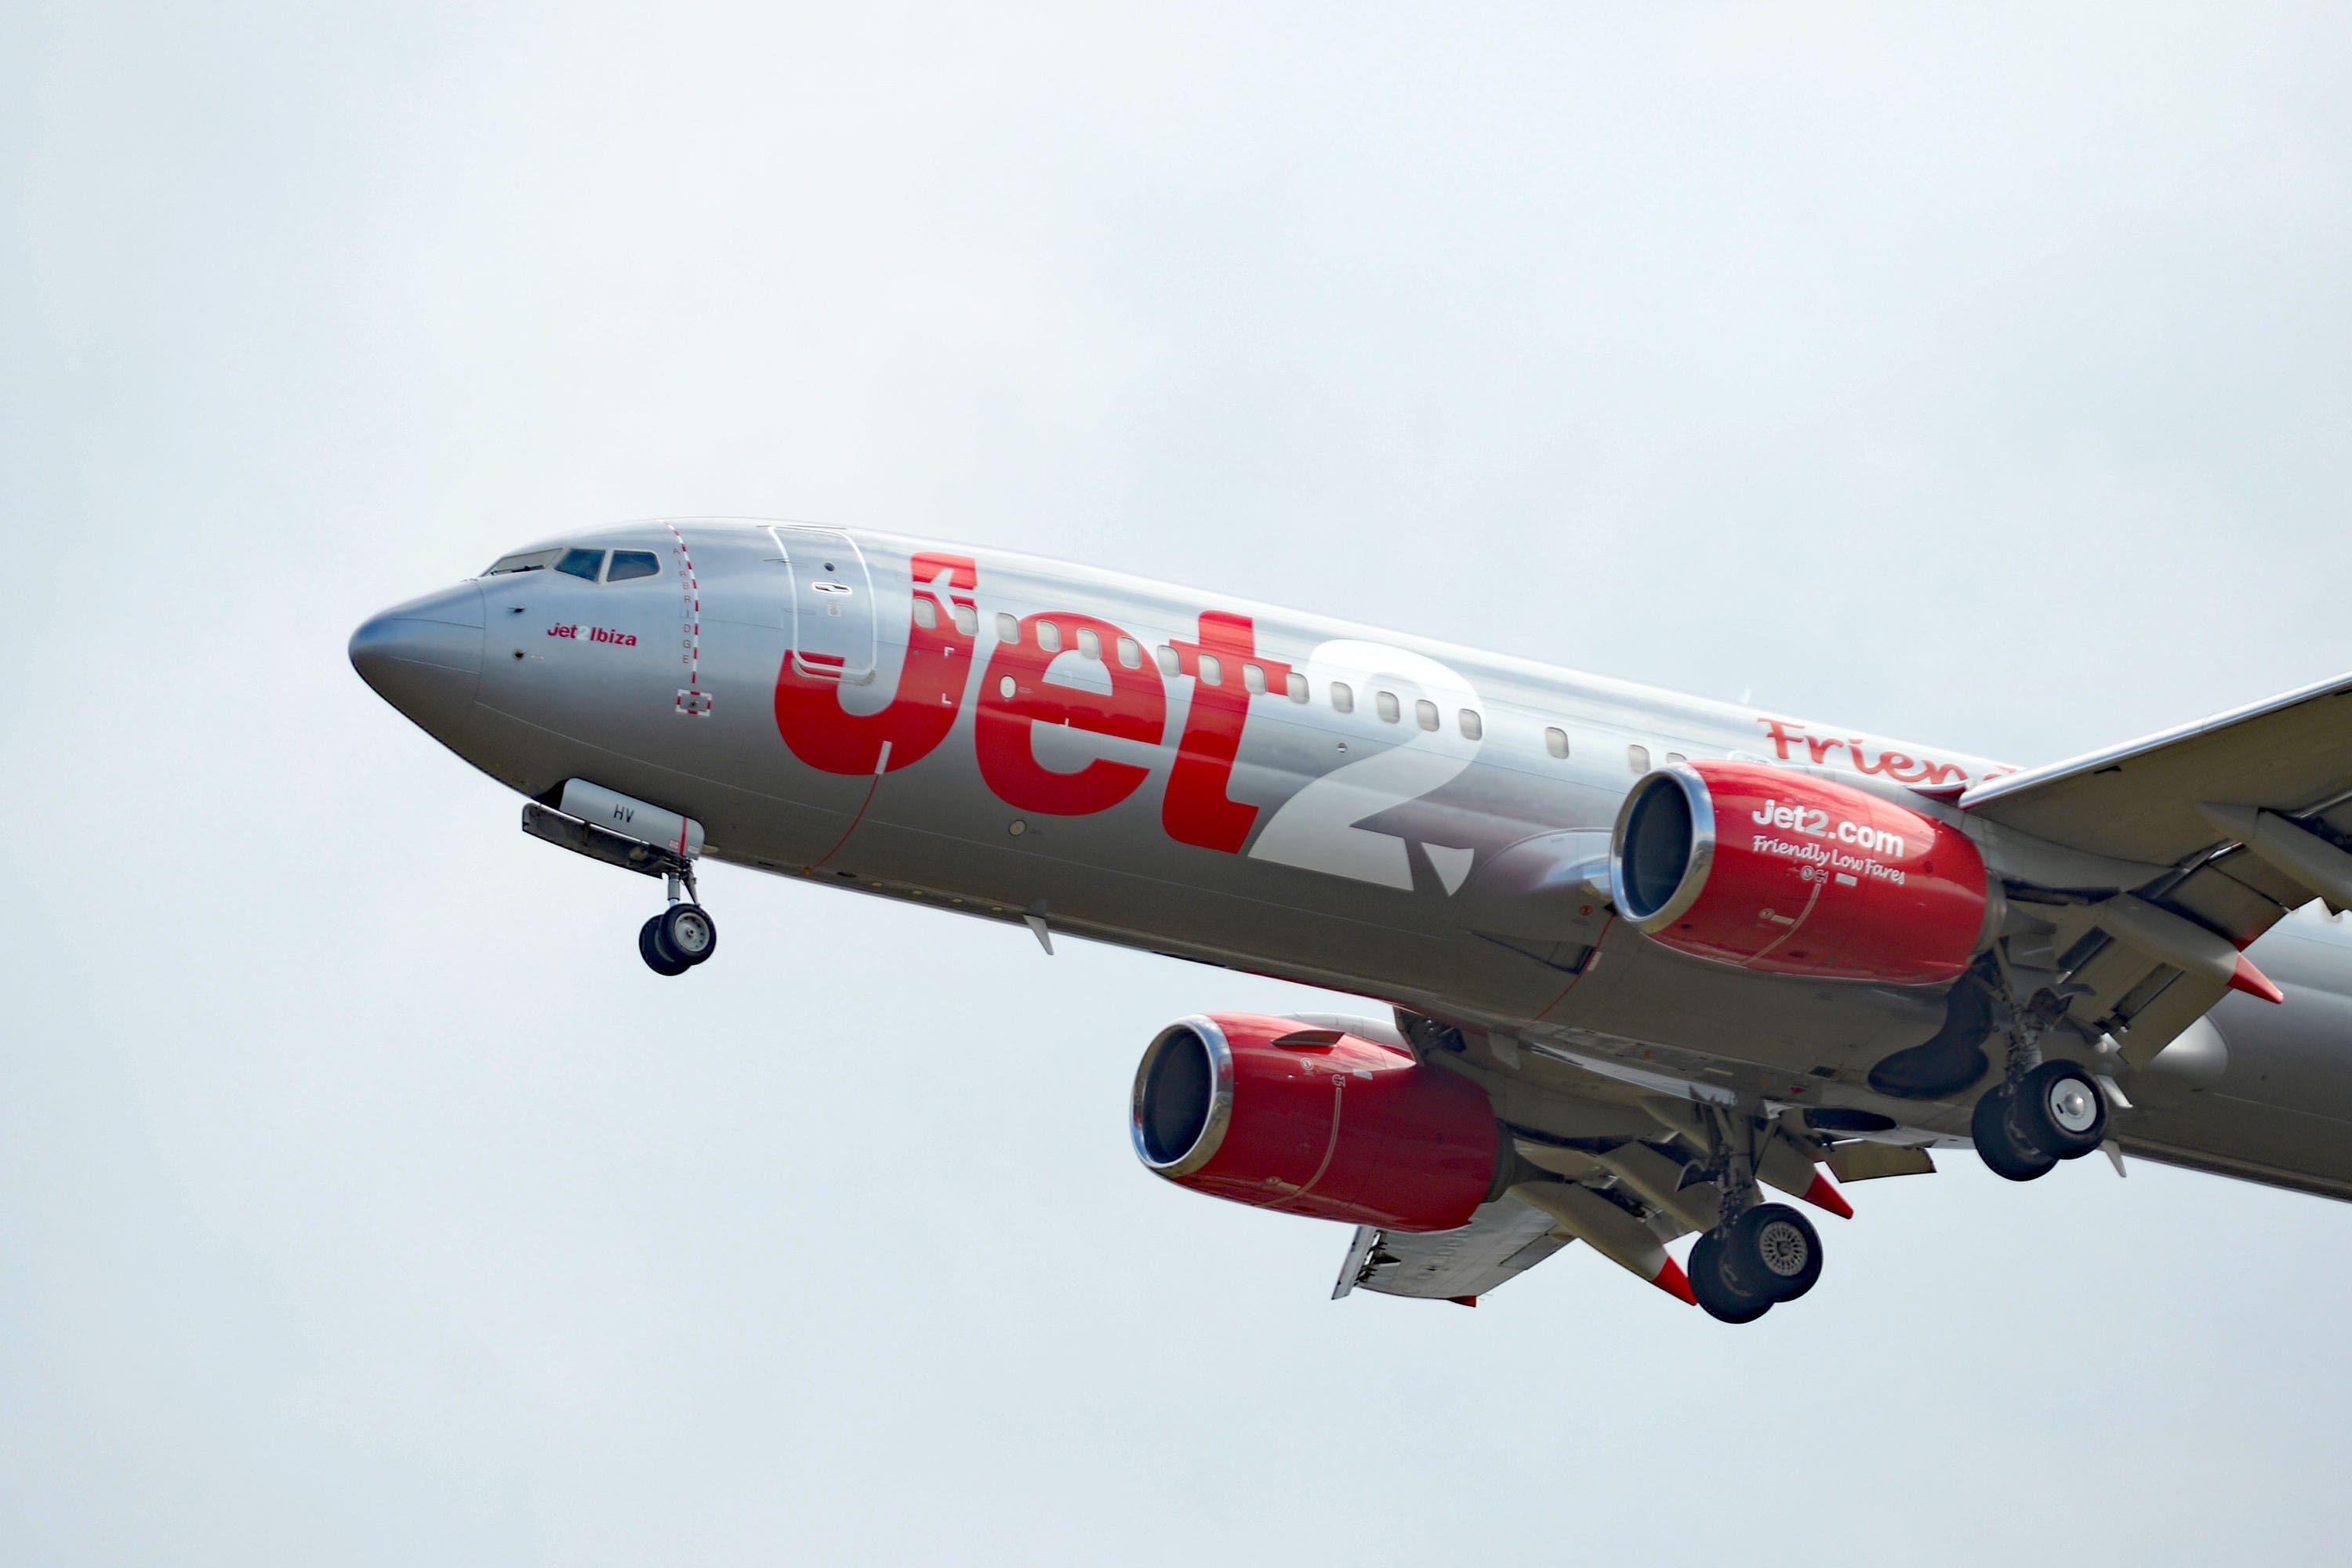 A passenger has died on a Jet2 plane